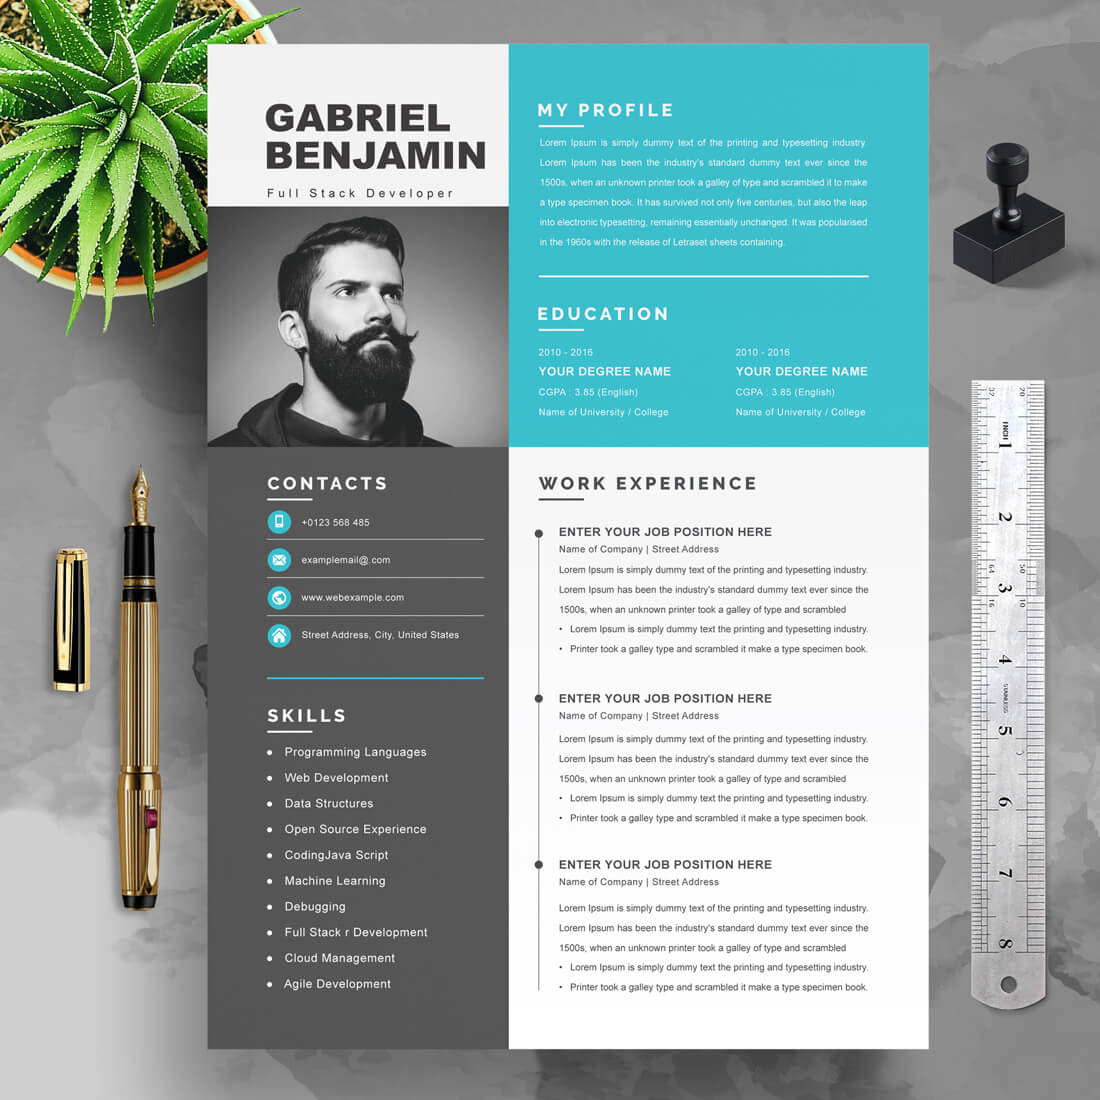 Full Stack Developer Resume Template | Professional Resume Template in Word & PSD Format cover image.